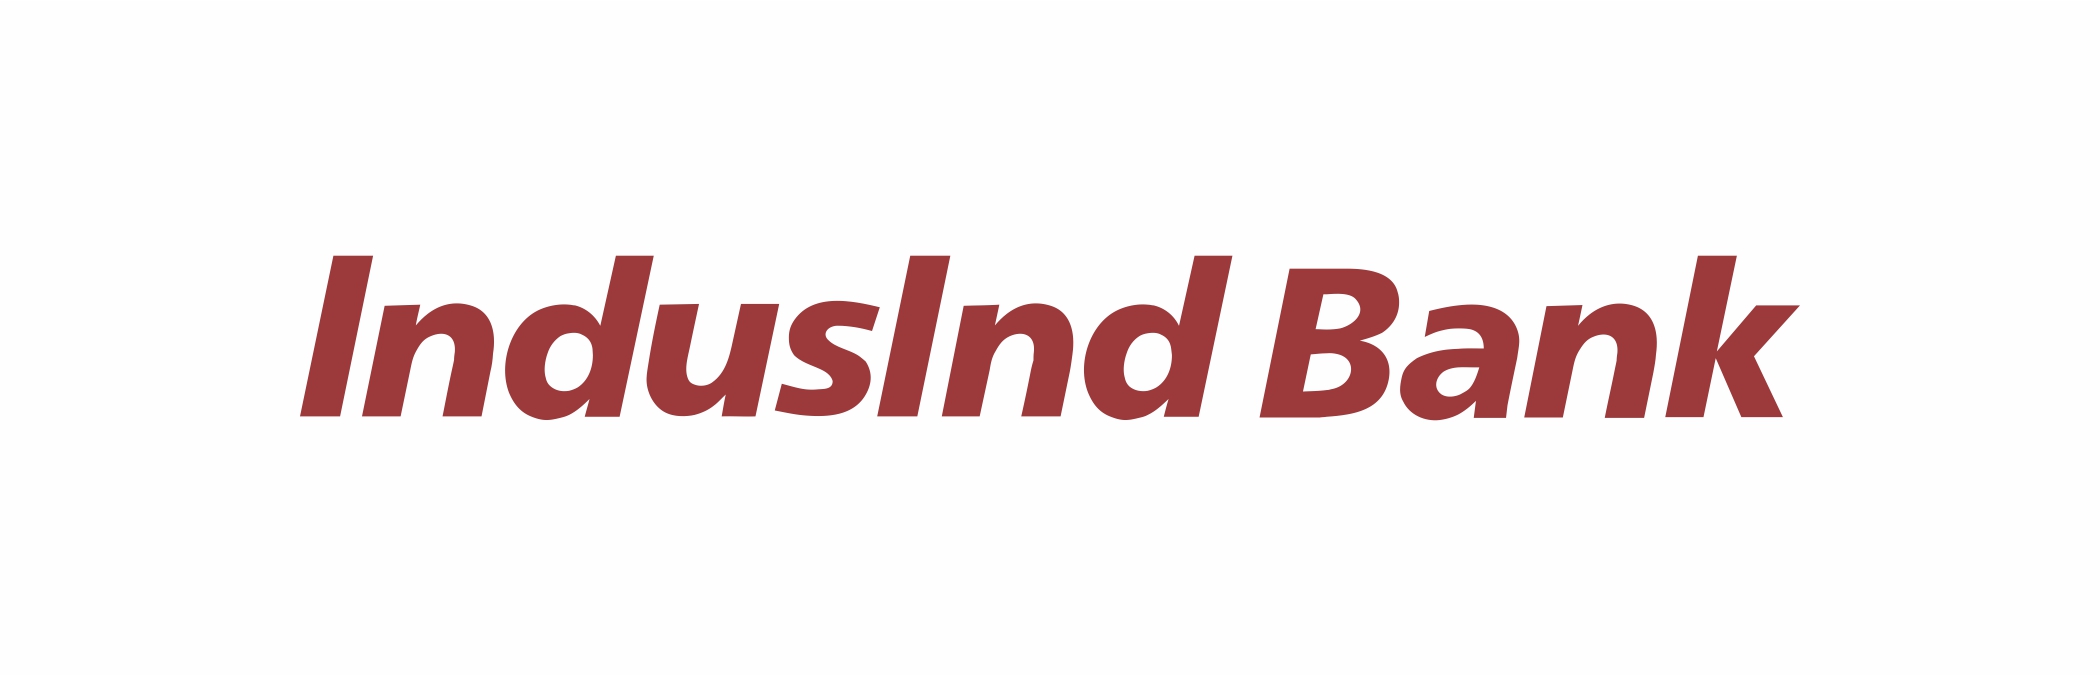 Media and Brand Coverage - IndusInd Bank